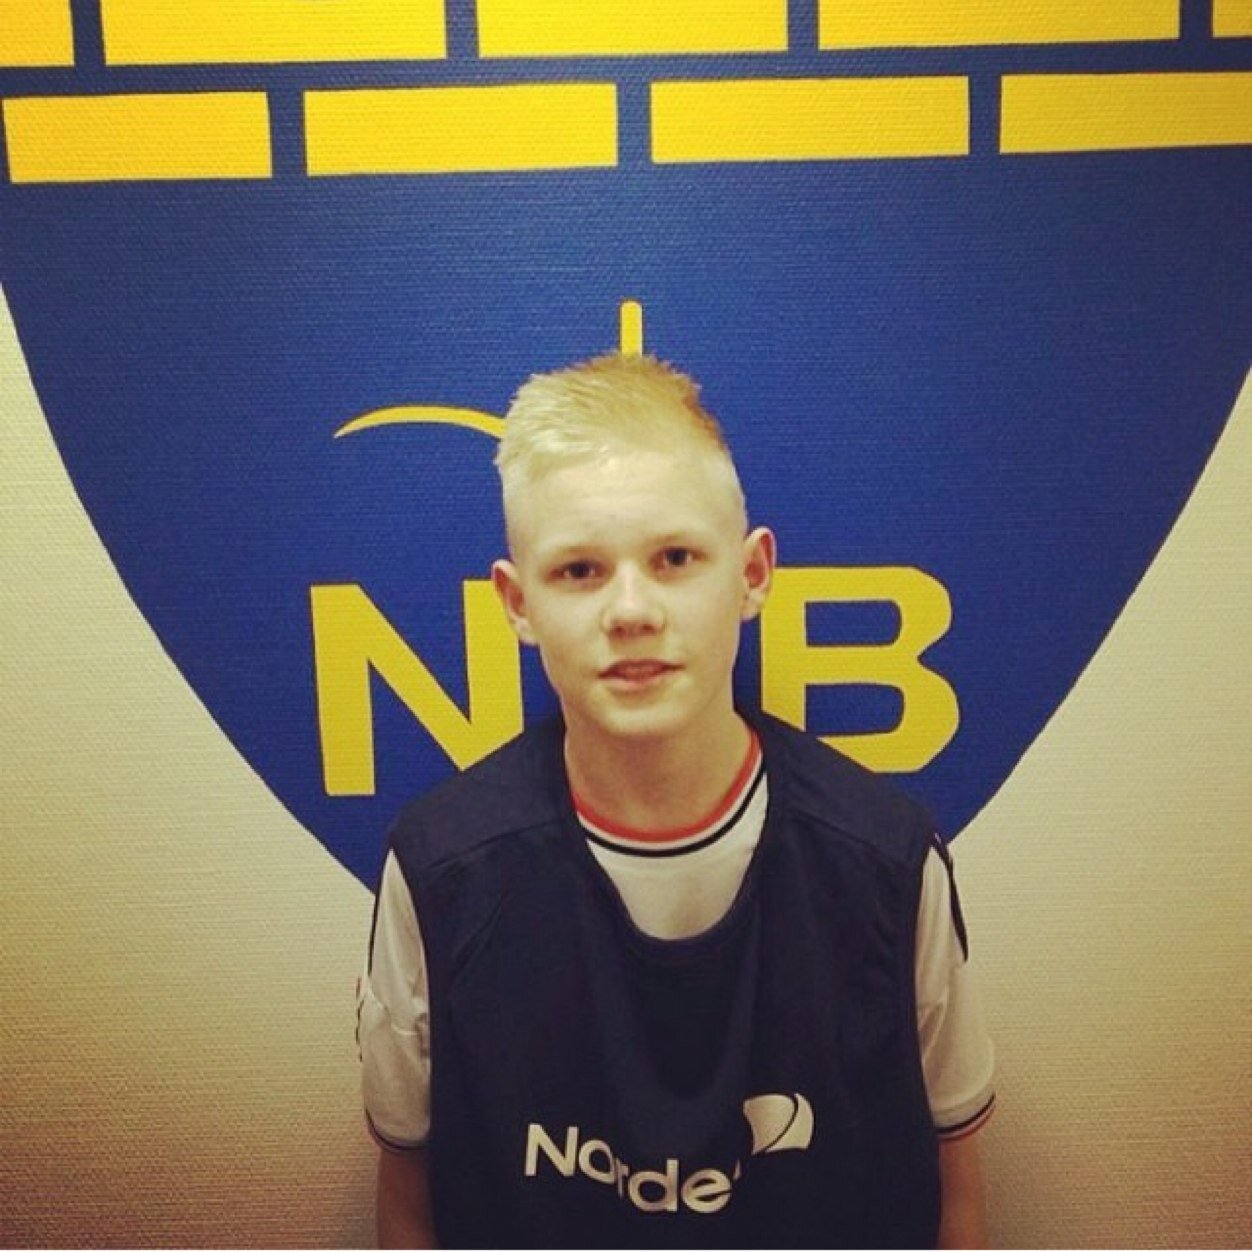 Hey Guys! I'm a soccer player. Football is not just a game, is my life! My number on my shirt is number 10. I play in Nexø! Football is my dream!